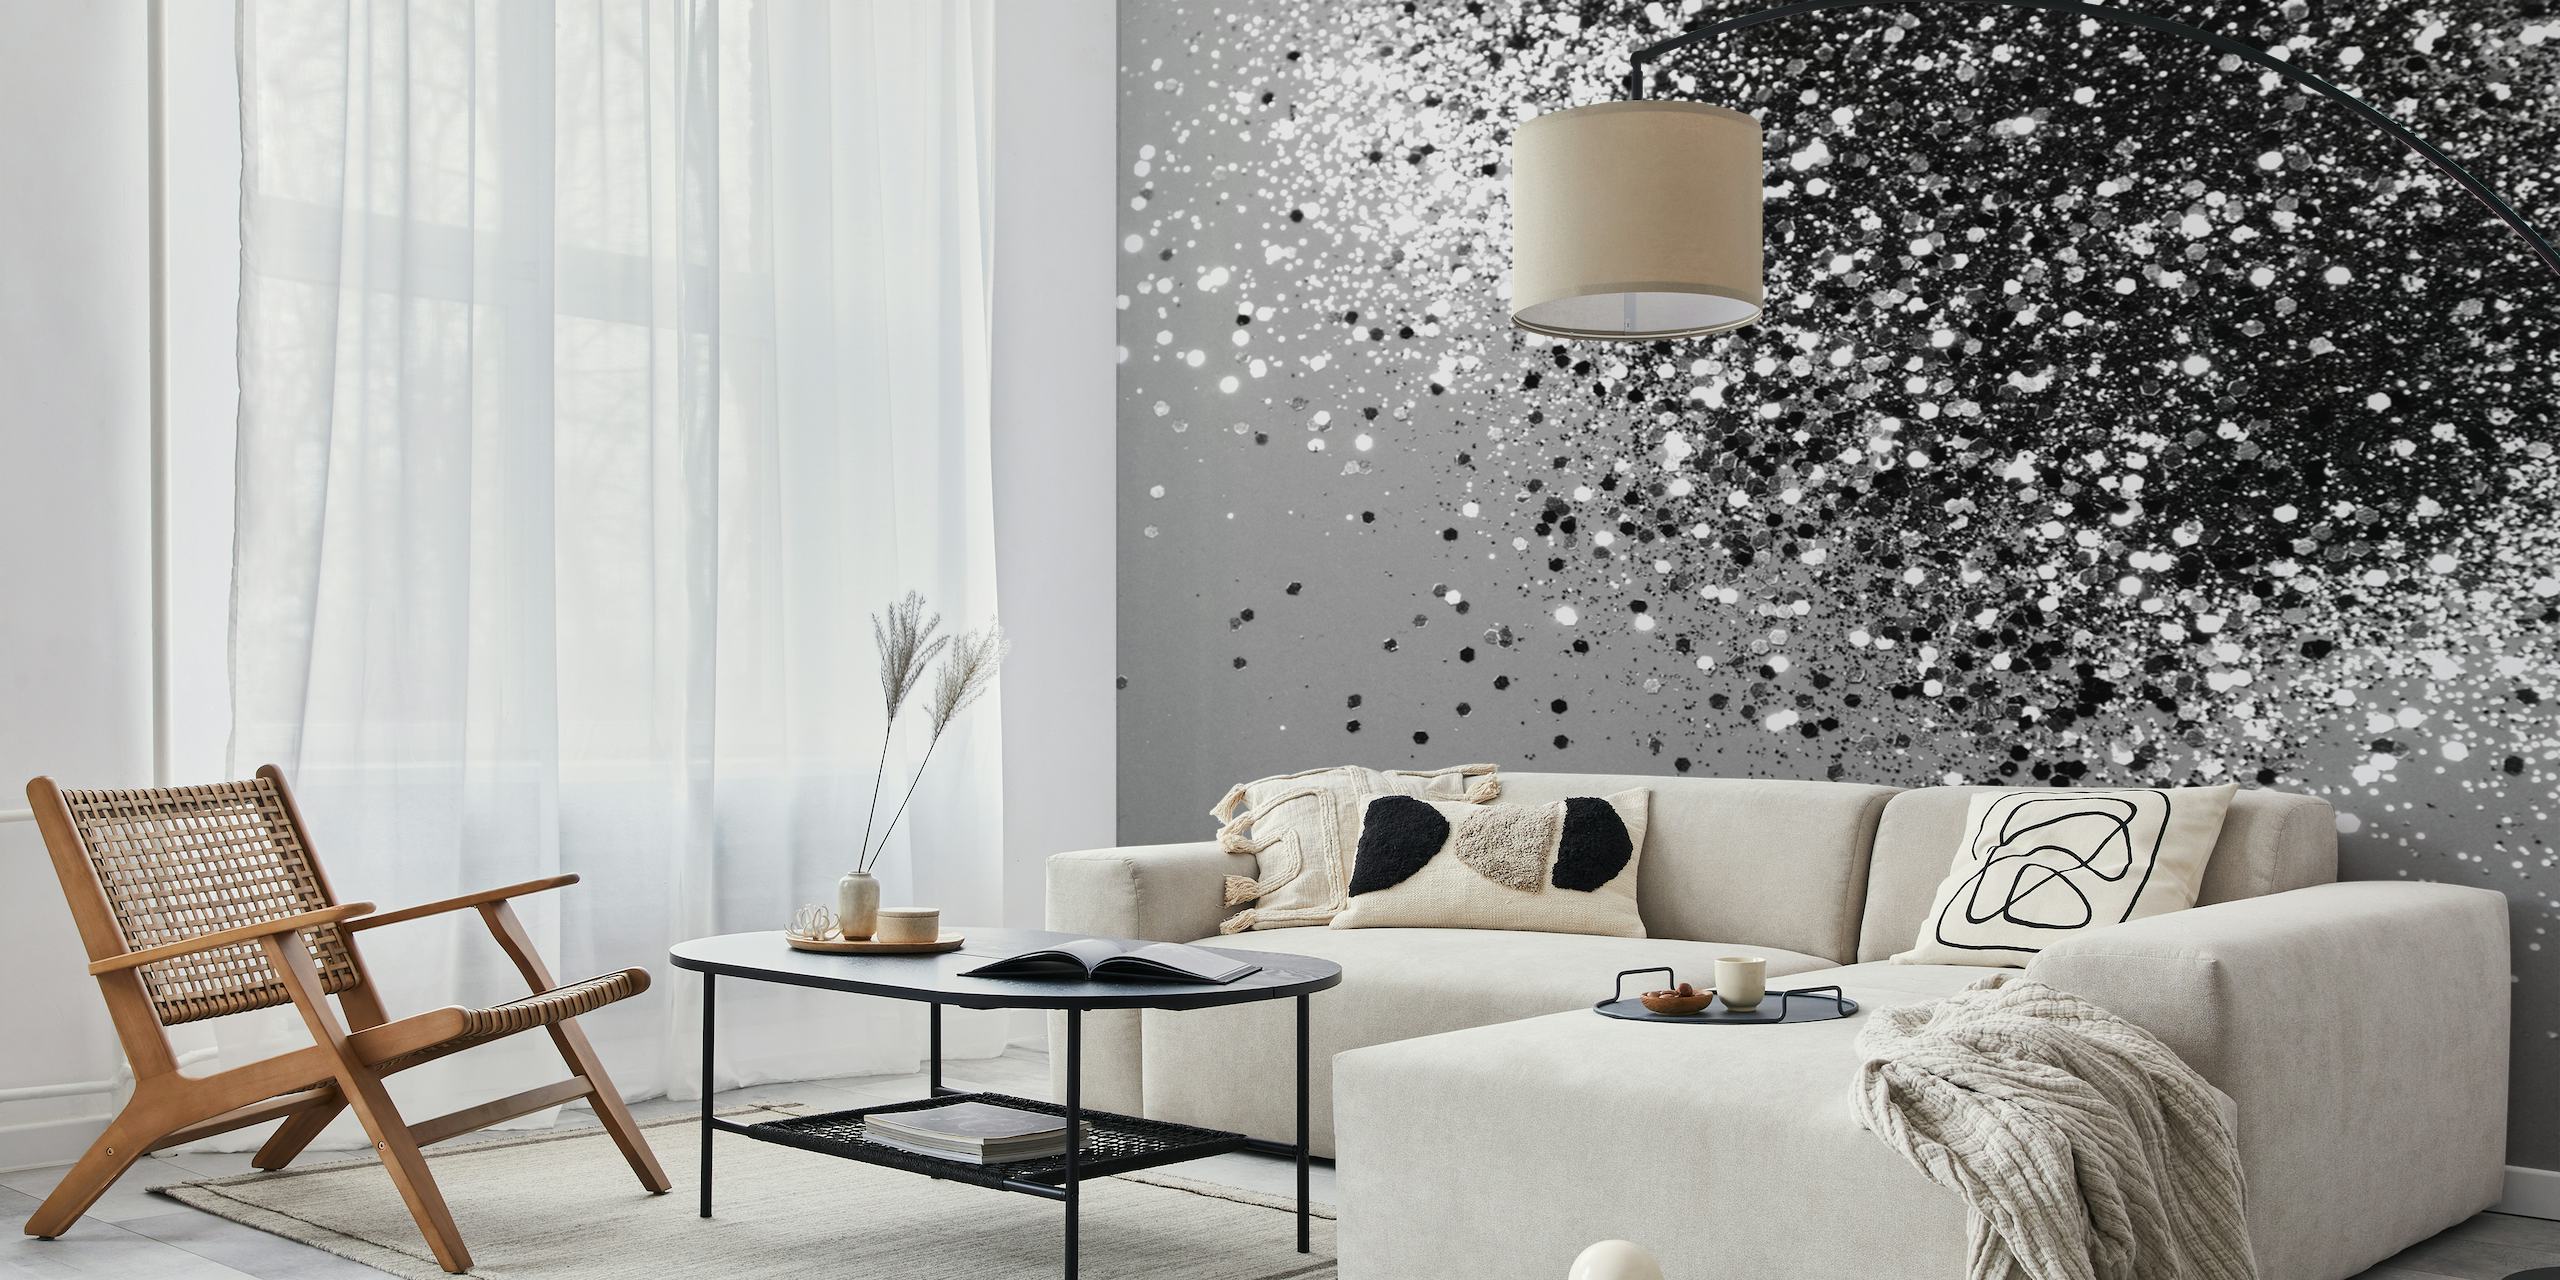 Silver and gray glitter wall mural for a touch of elegance